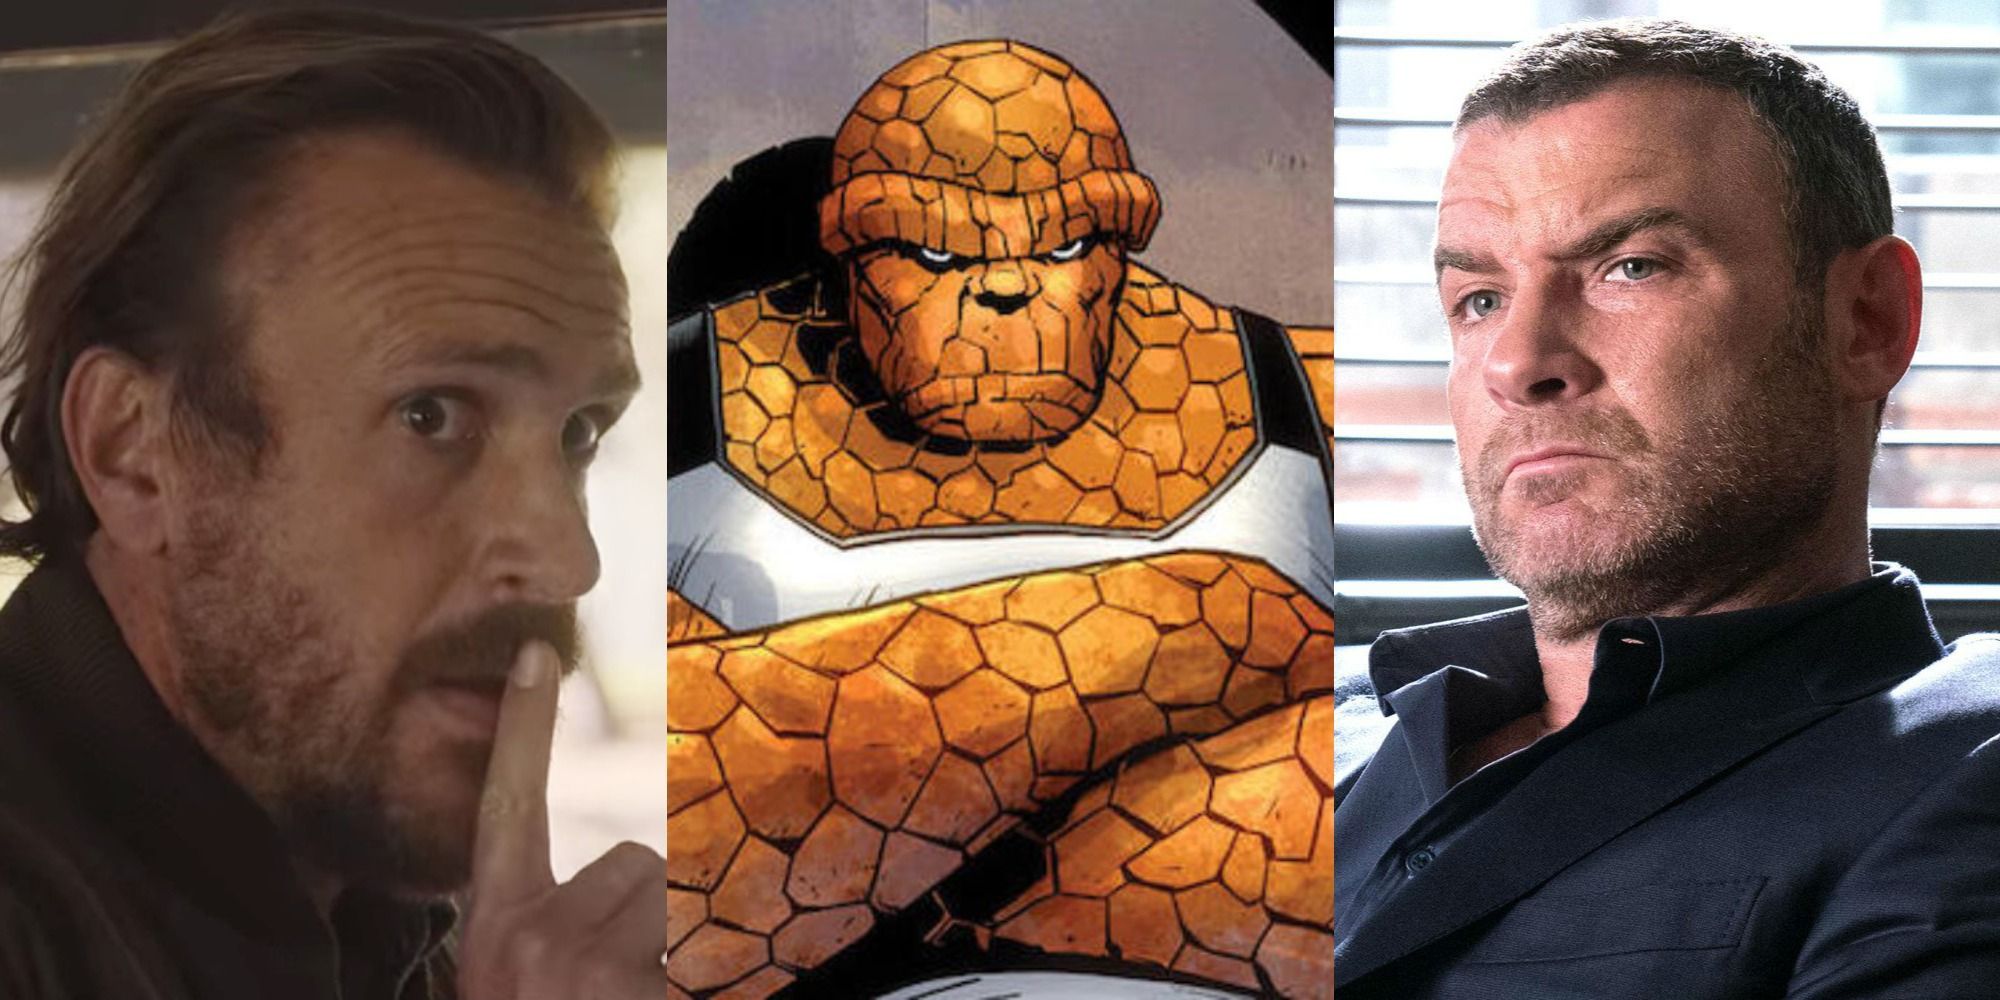 Mcu 10 Actors Who Should Play The Fantastic Four S The Thing According To Reddit